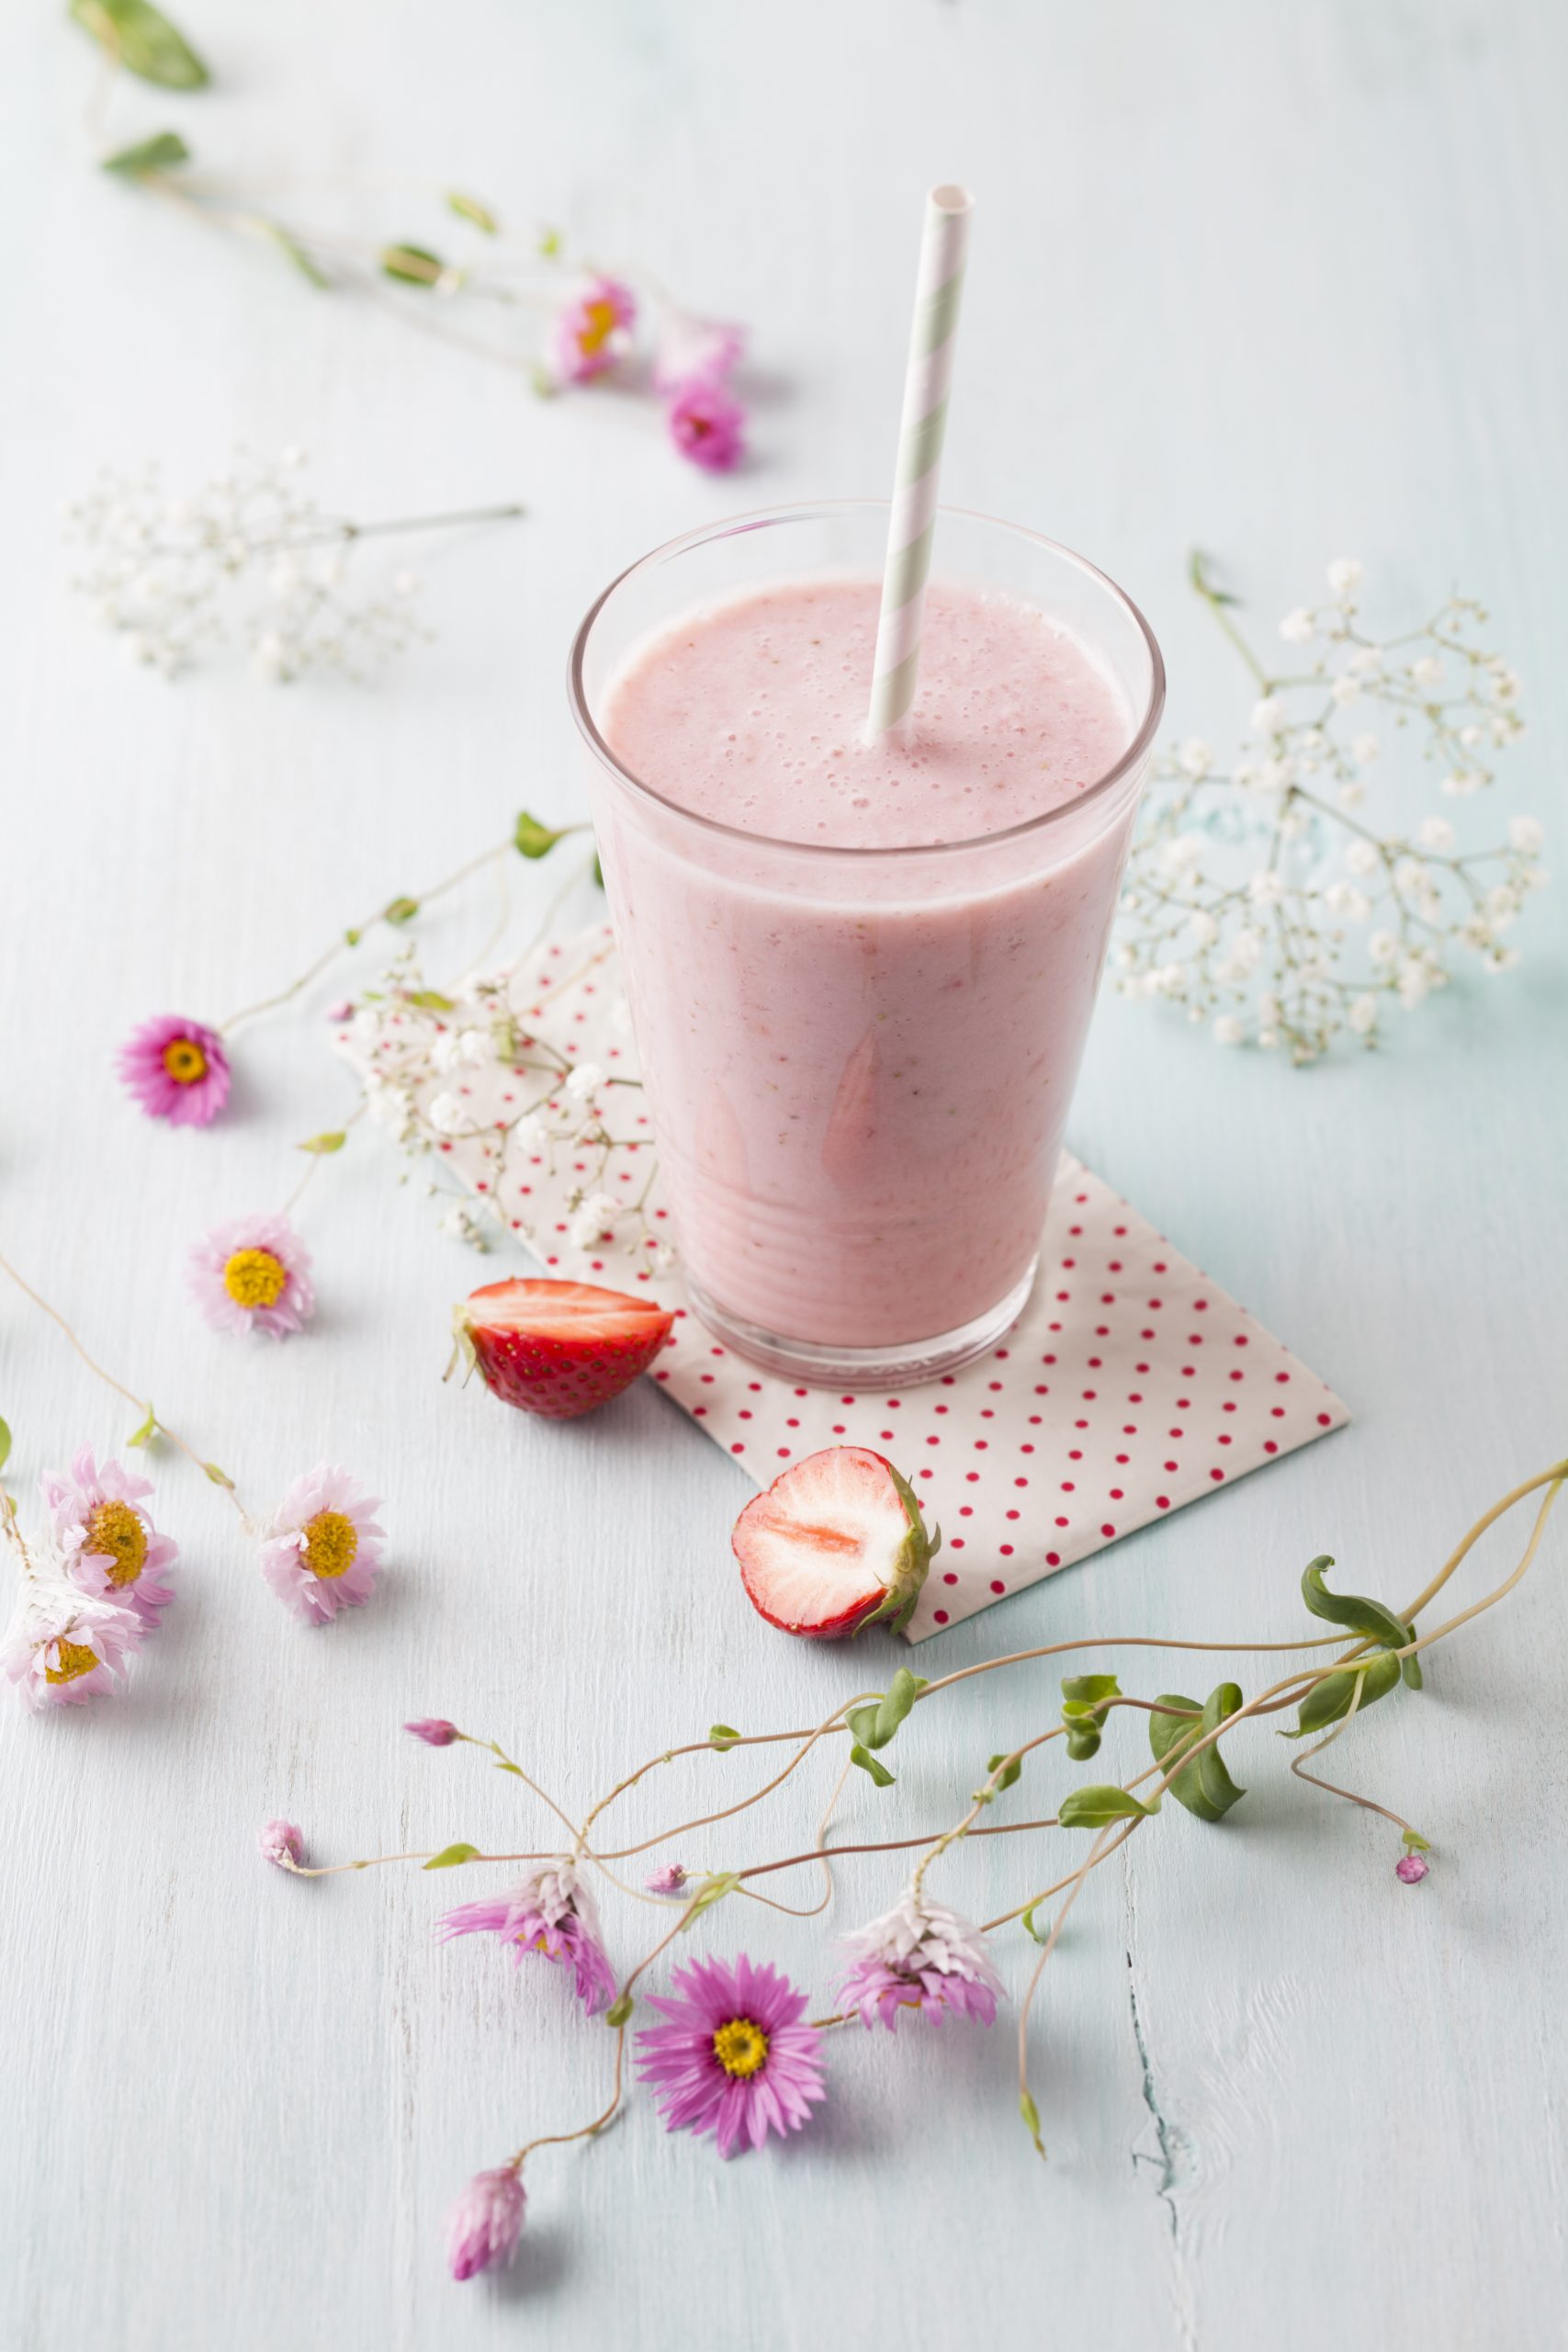 Do Smoothies Help You Lose Weight?